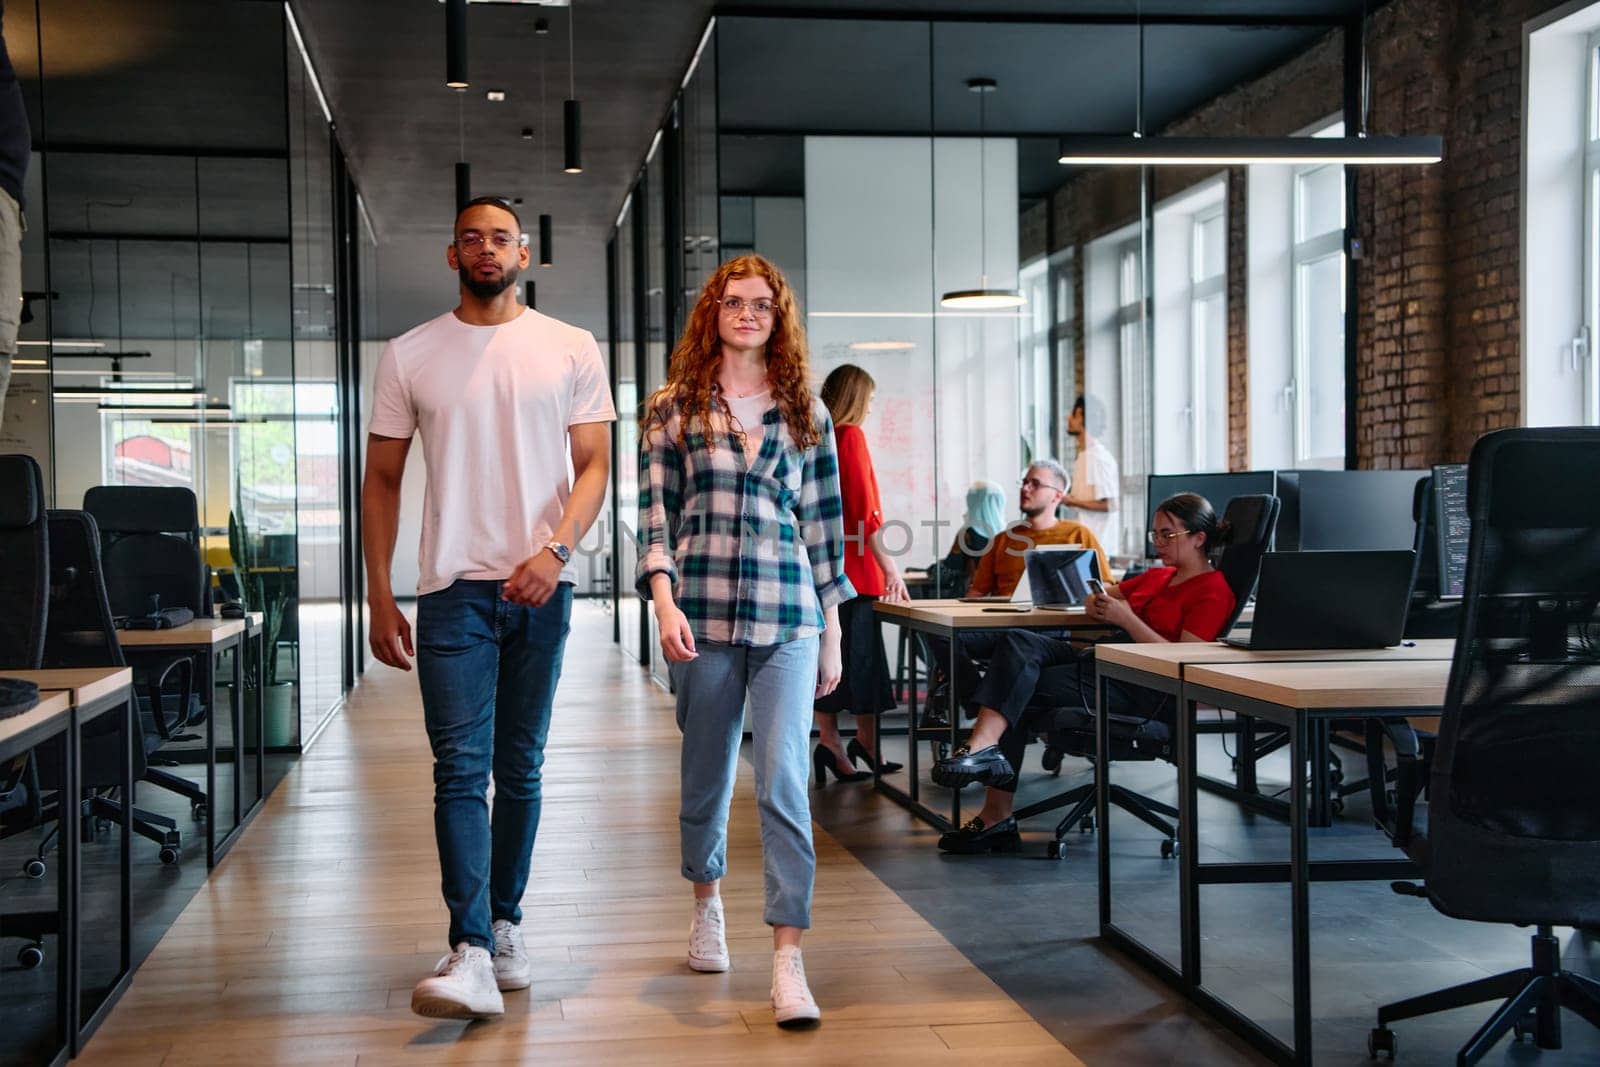 An African-American business colleague and his orange-haired female counterpart engage in collaborative discussion within a modern startup office, epitomizing diversity and teamwork in the entrepreneurial environment.